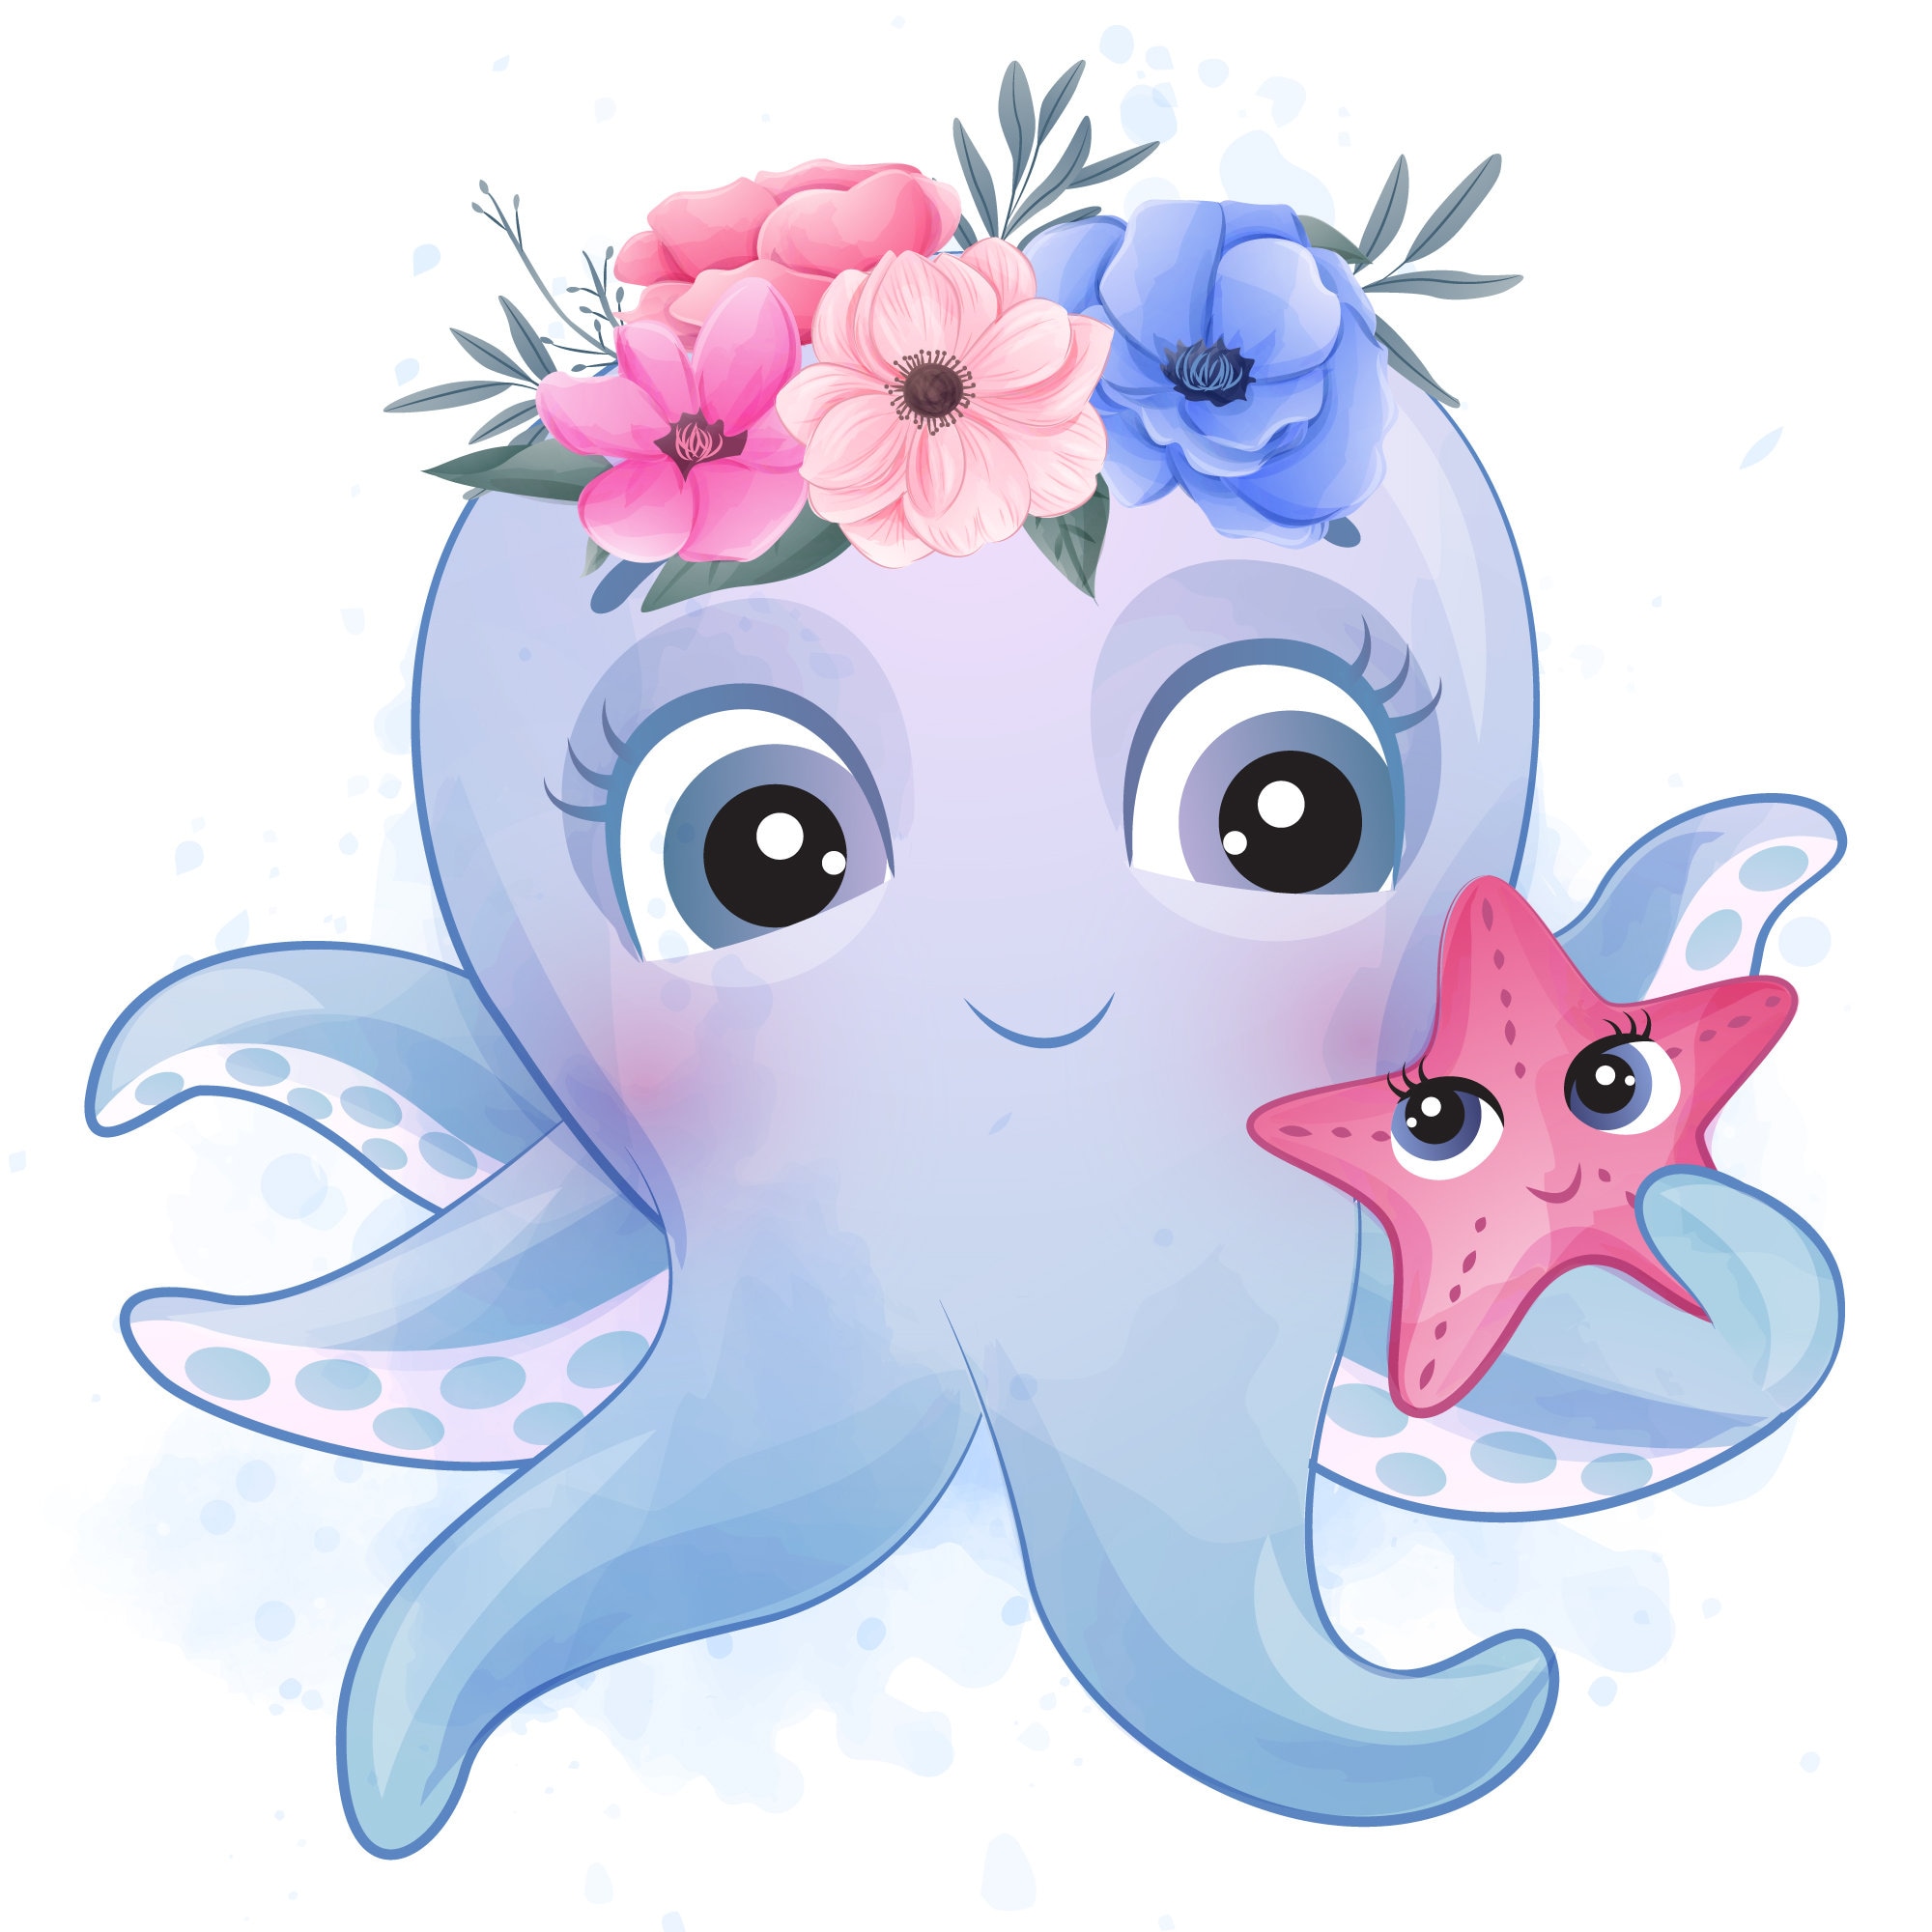 Buy Cute Octopus Clipart With Watercolor Illustration Online in India - Etsy